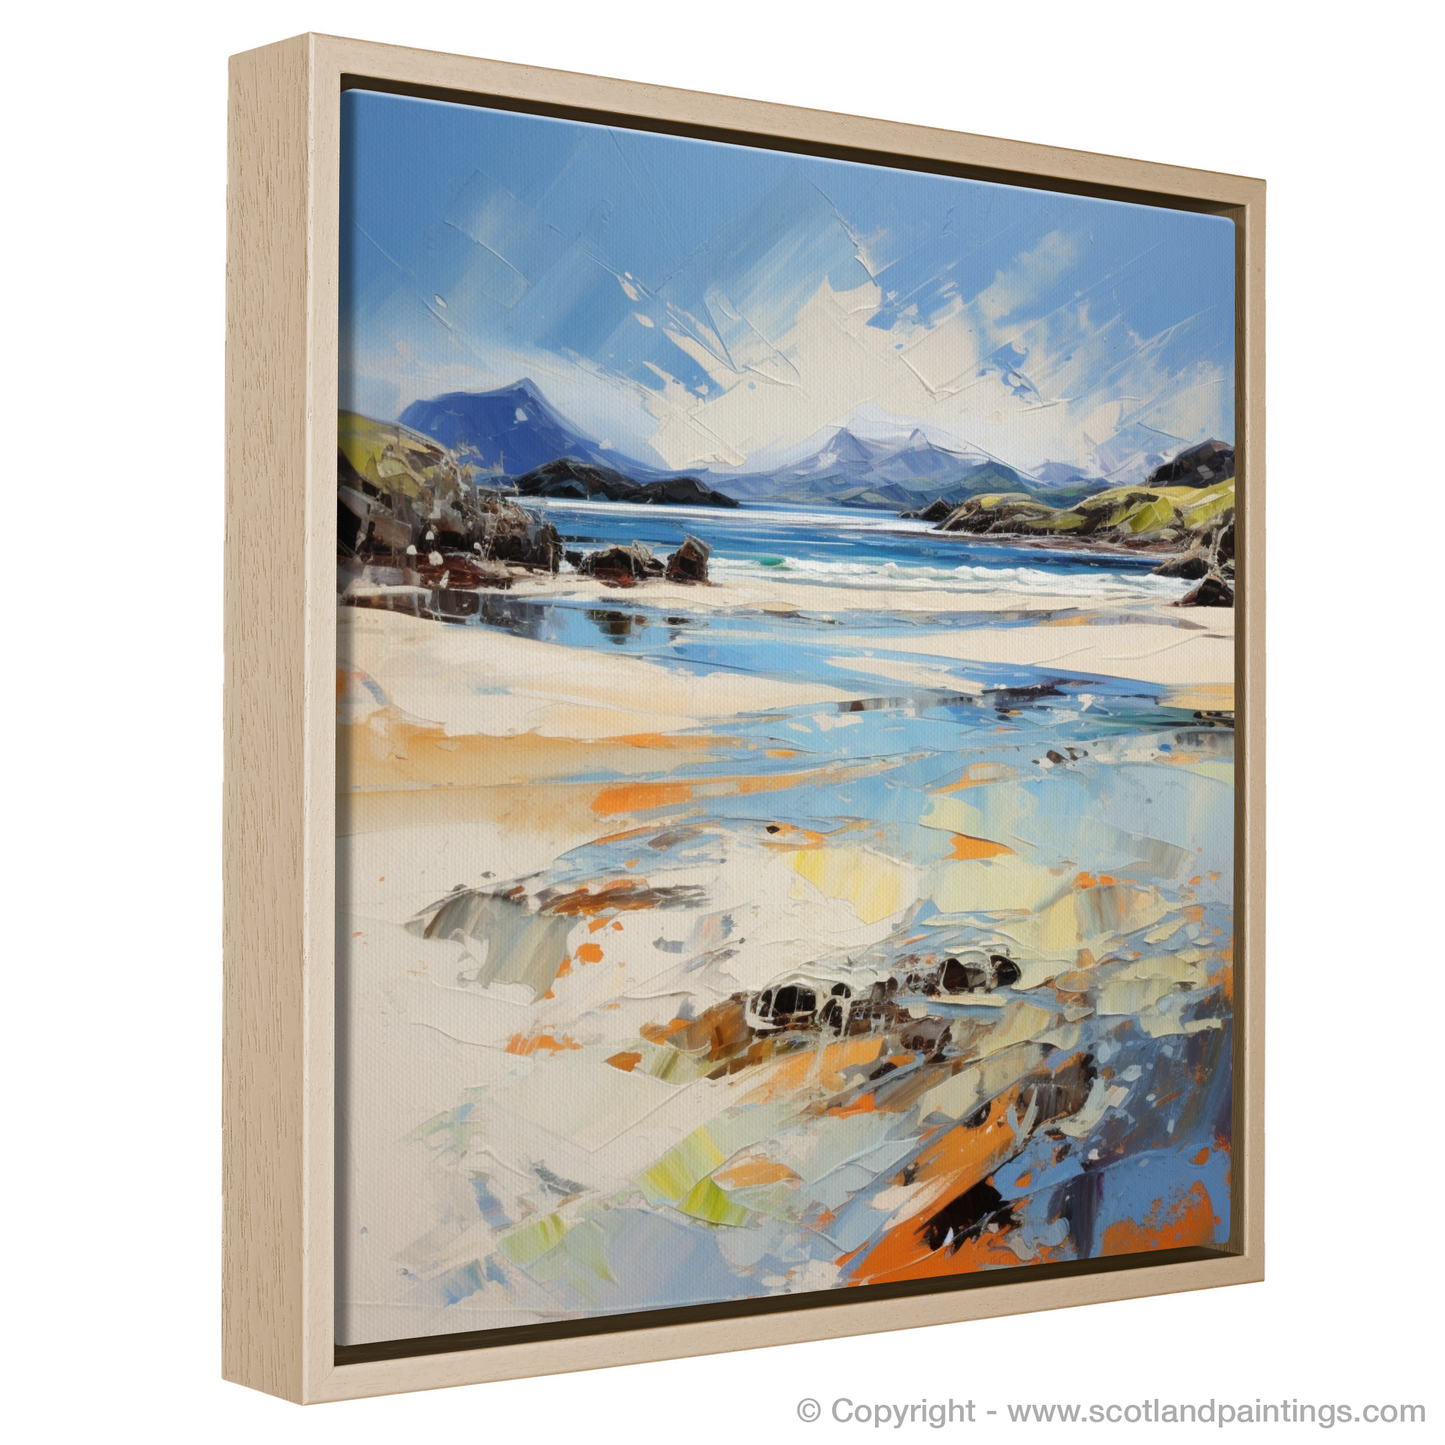 Painting and Art Print of Camusdarach Beach, Arisaig entitled "Camusdarach Beach Whispers: An Expressionist Ode to Scottish Shores".